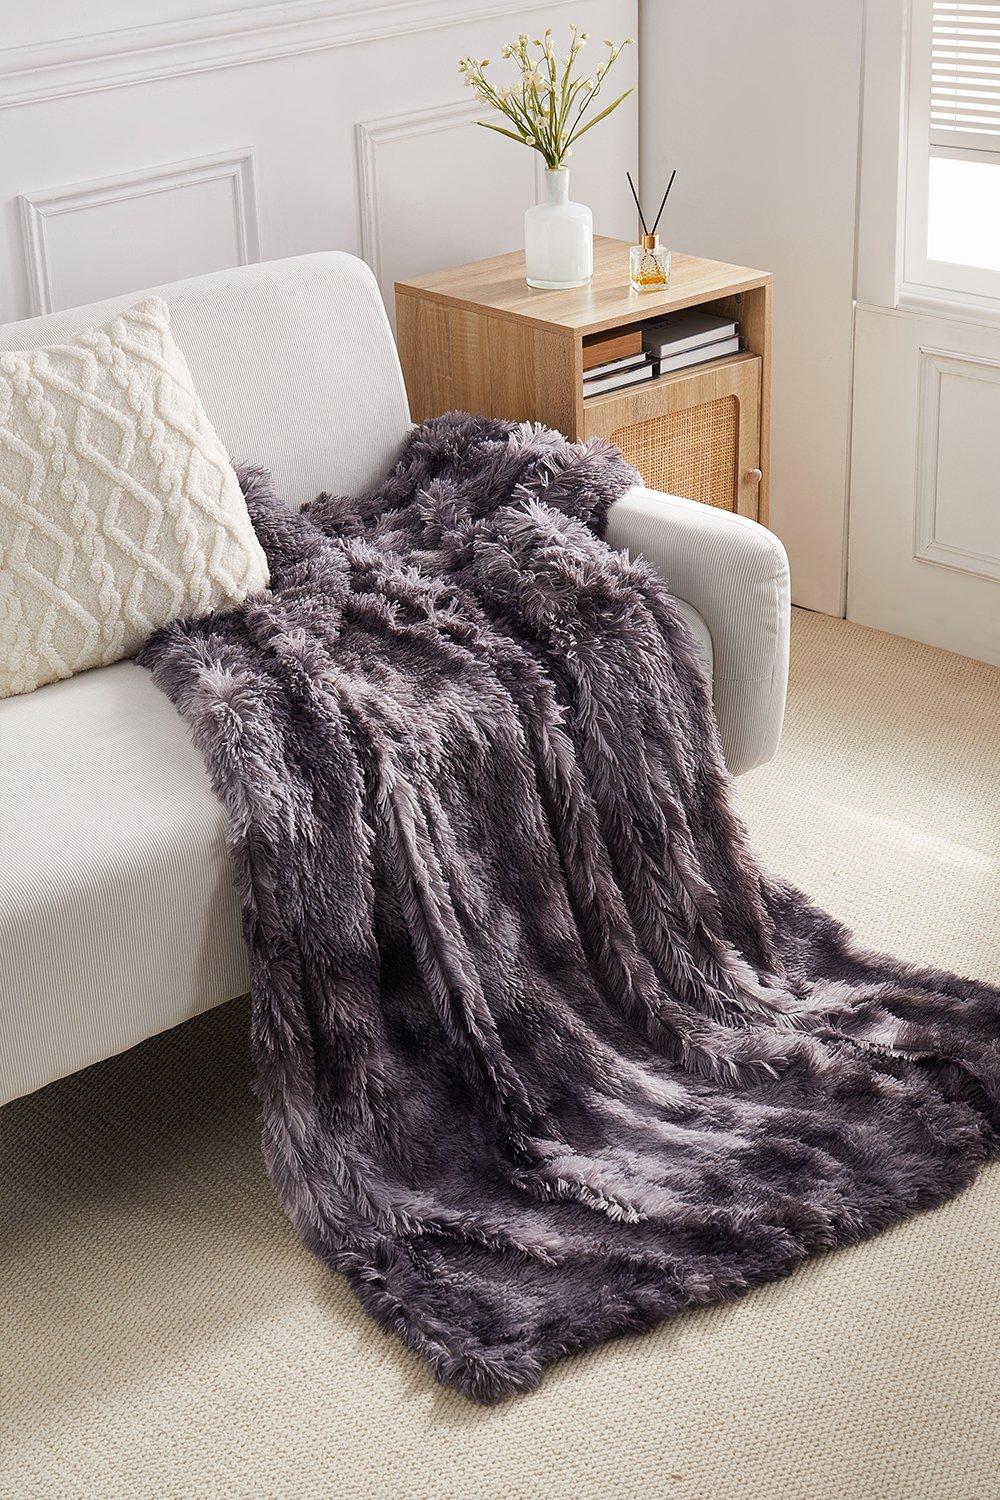 Tie-dye Plush Blanket for Couch and Bed